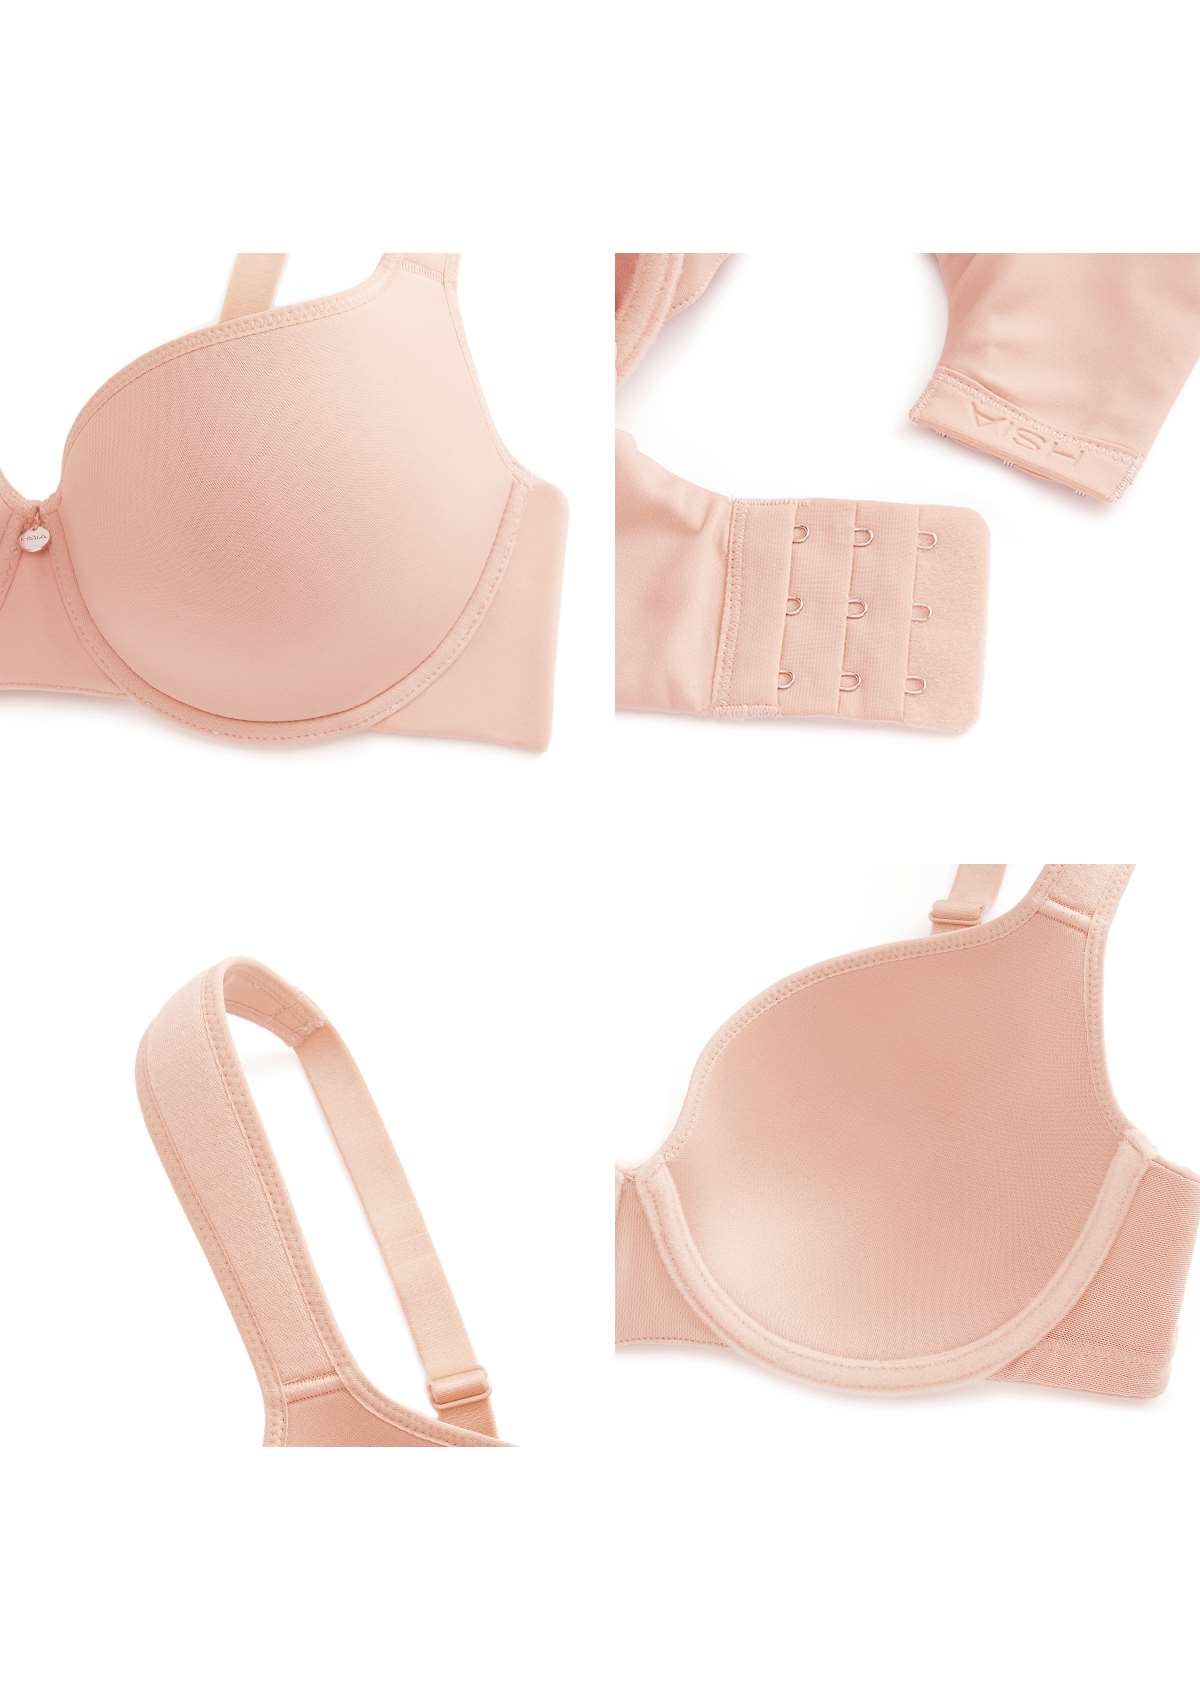 HSIA Patricia Smooth Classic T-shirt Lightly Padded Minimizer Bra - Light Pink / 34 / H